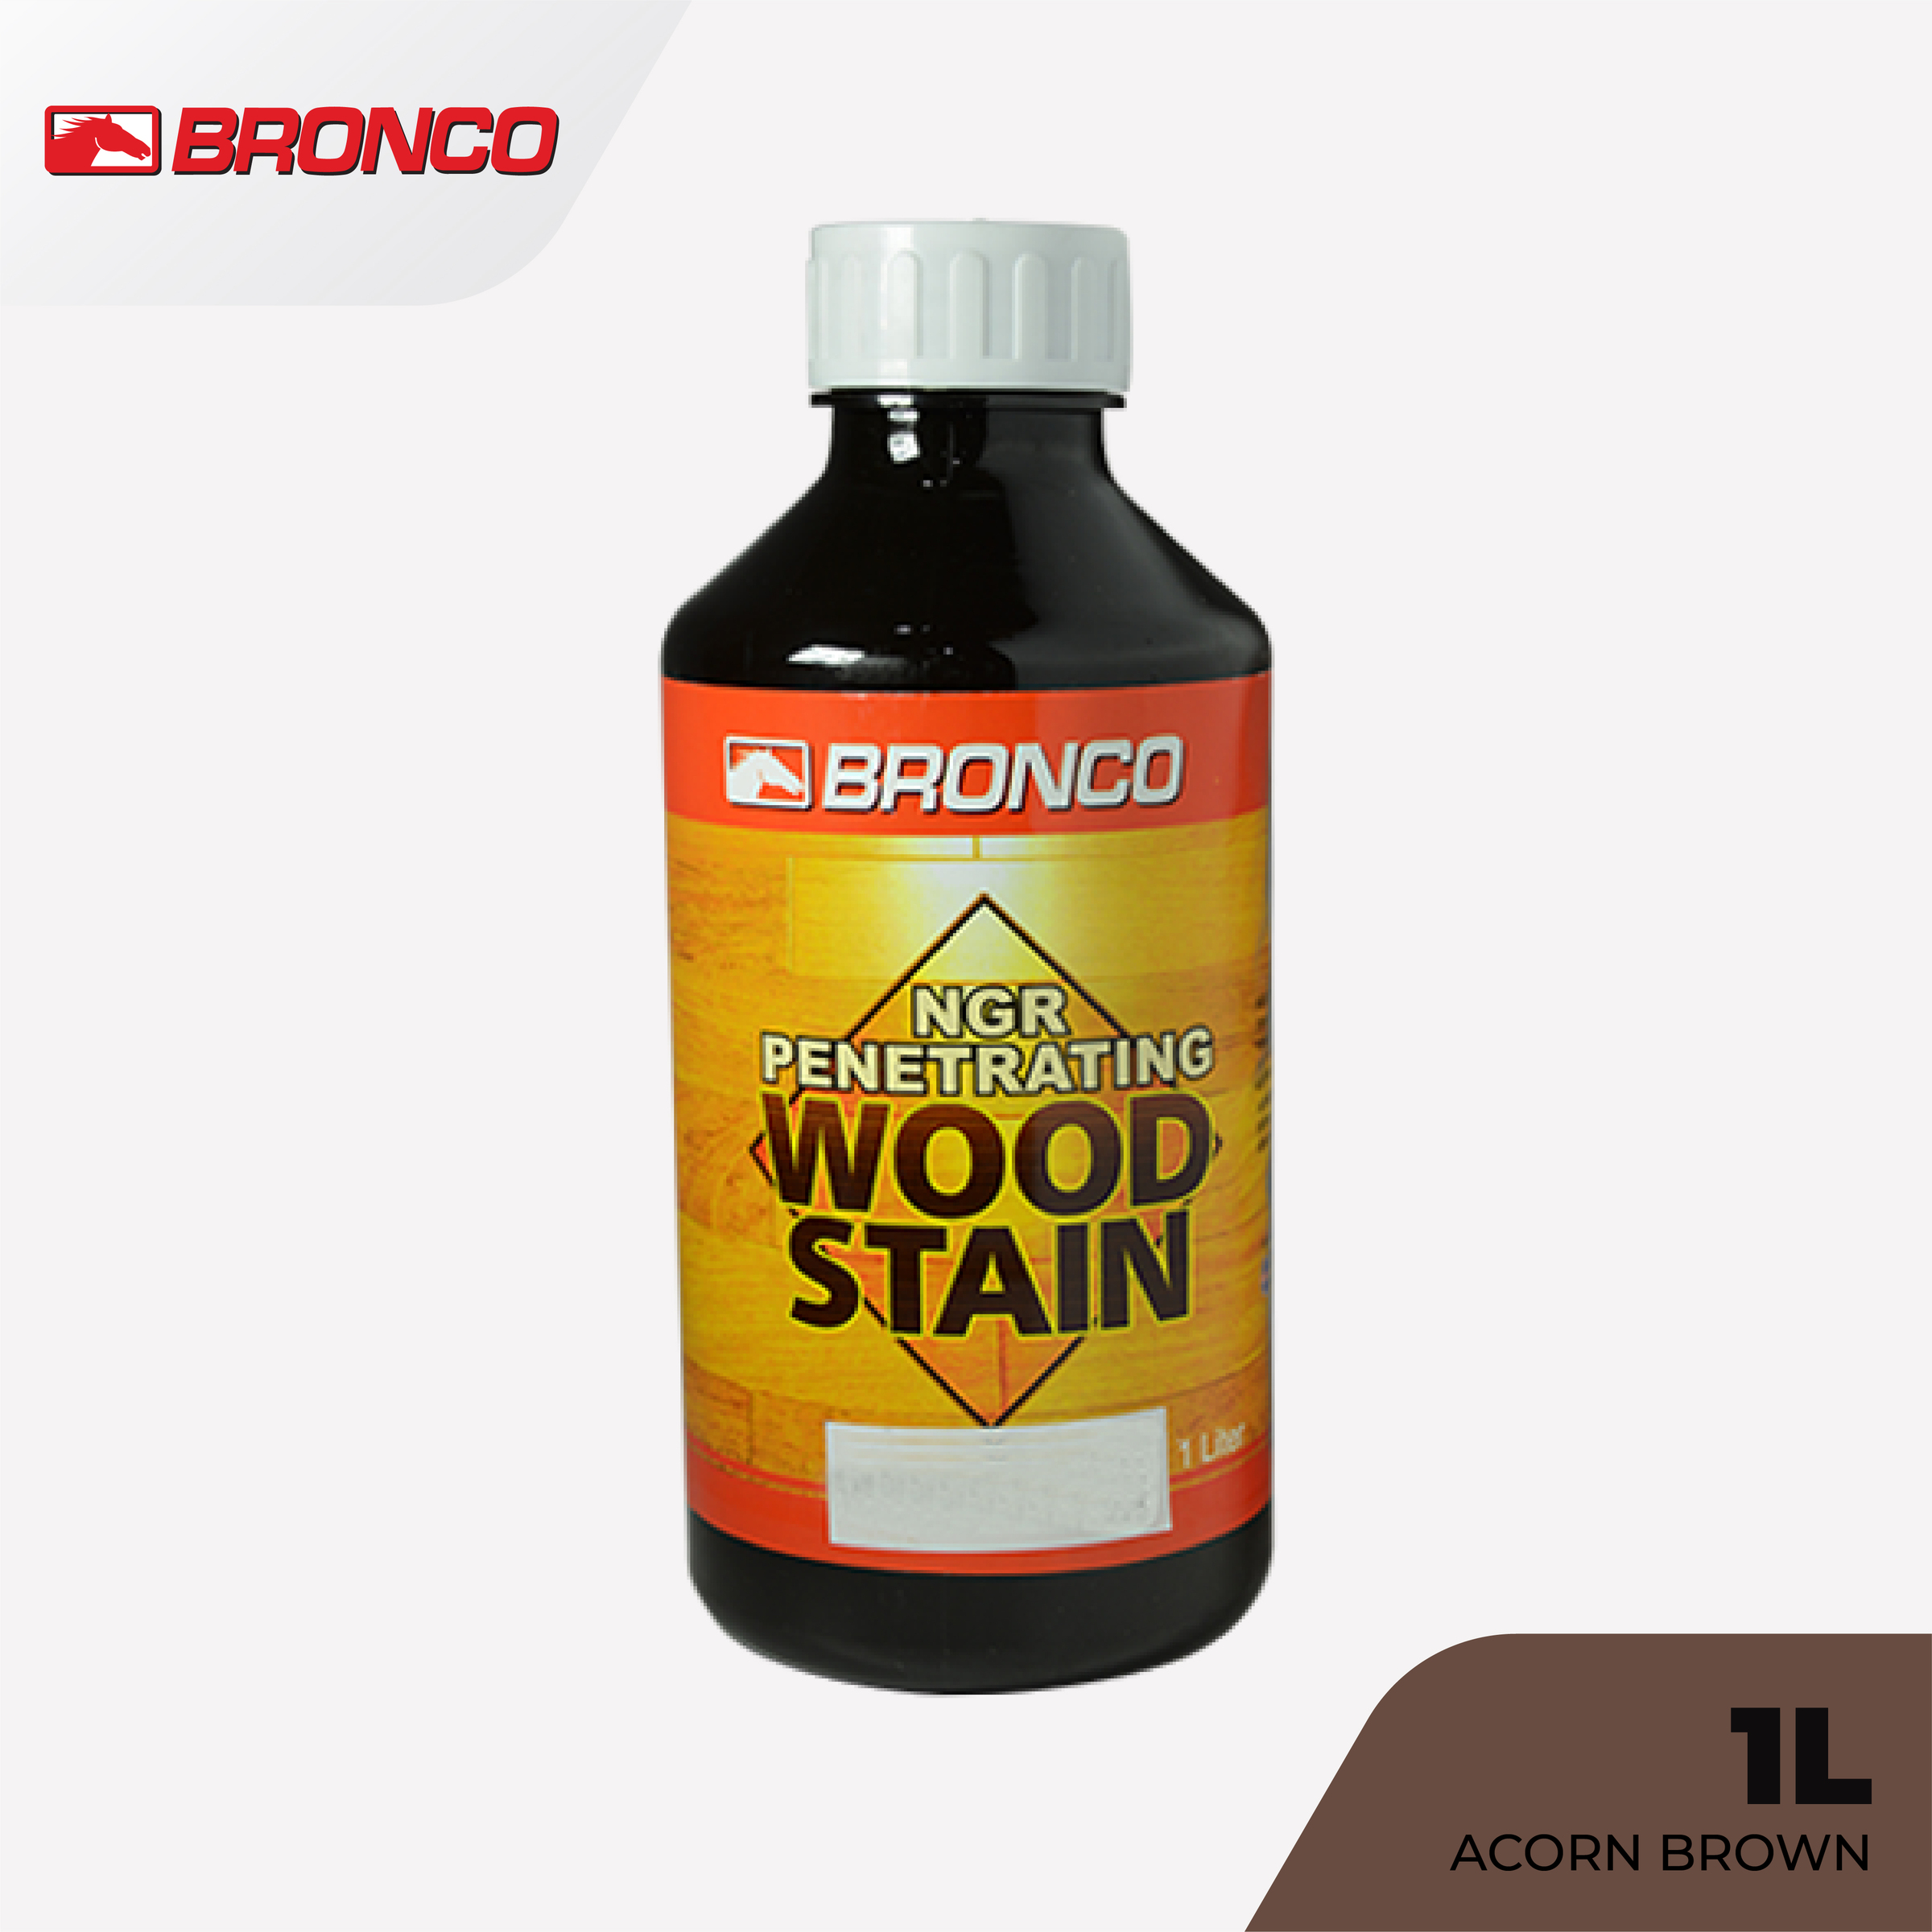 Bronco NGR Penetrating Wood Stain Acron Brown - 1L